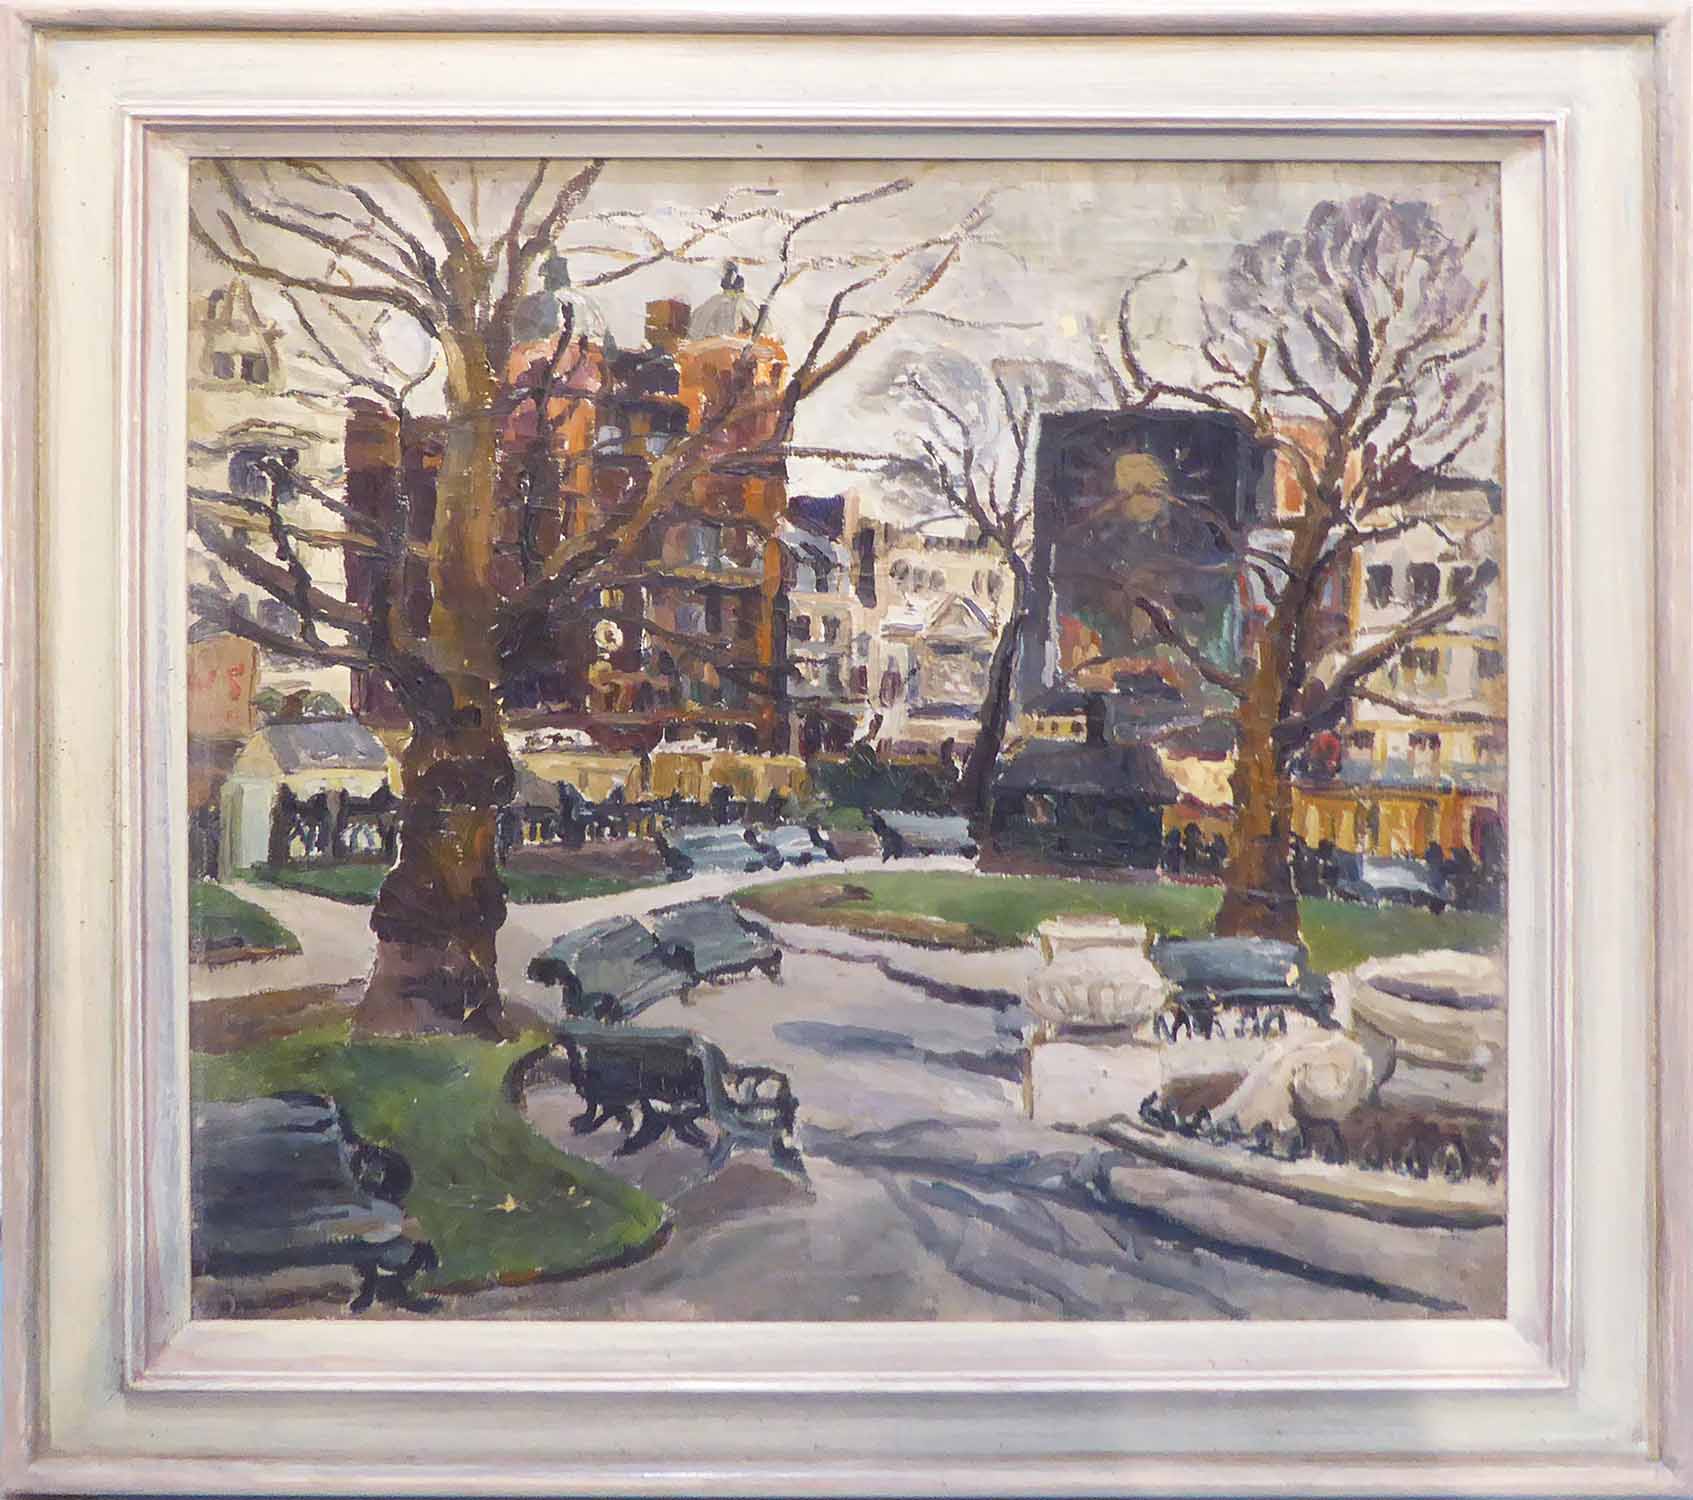 DENISE BROADLEY (British 1913-2007) 'Leicester Square', 1933, oil on canvas,